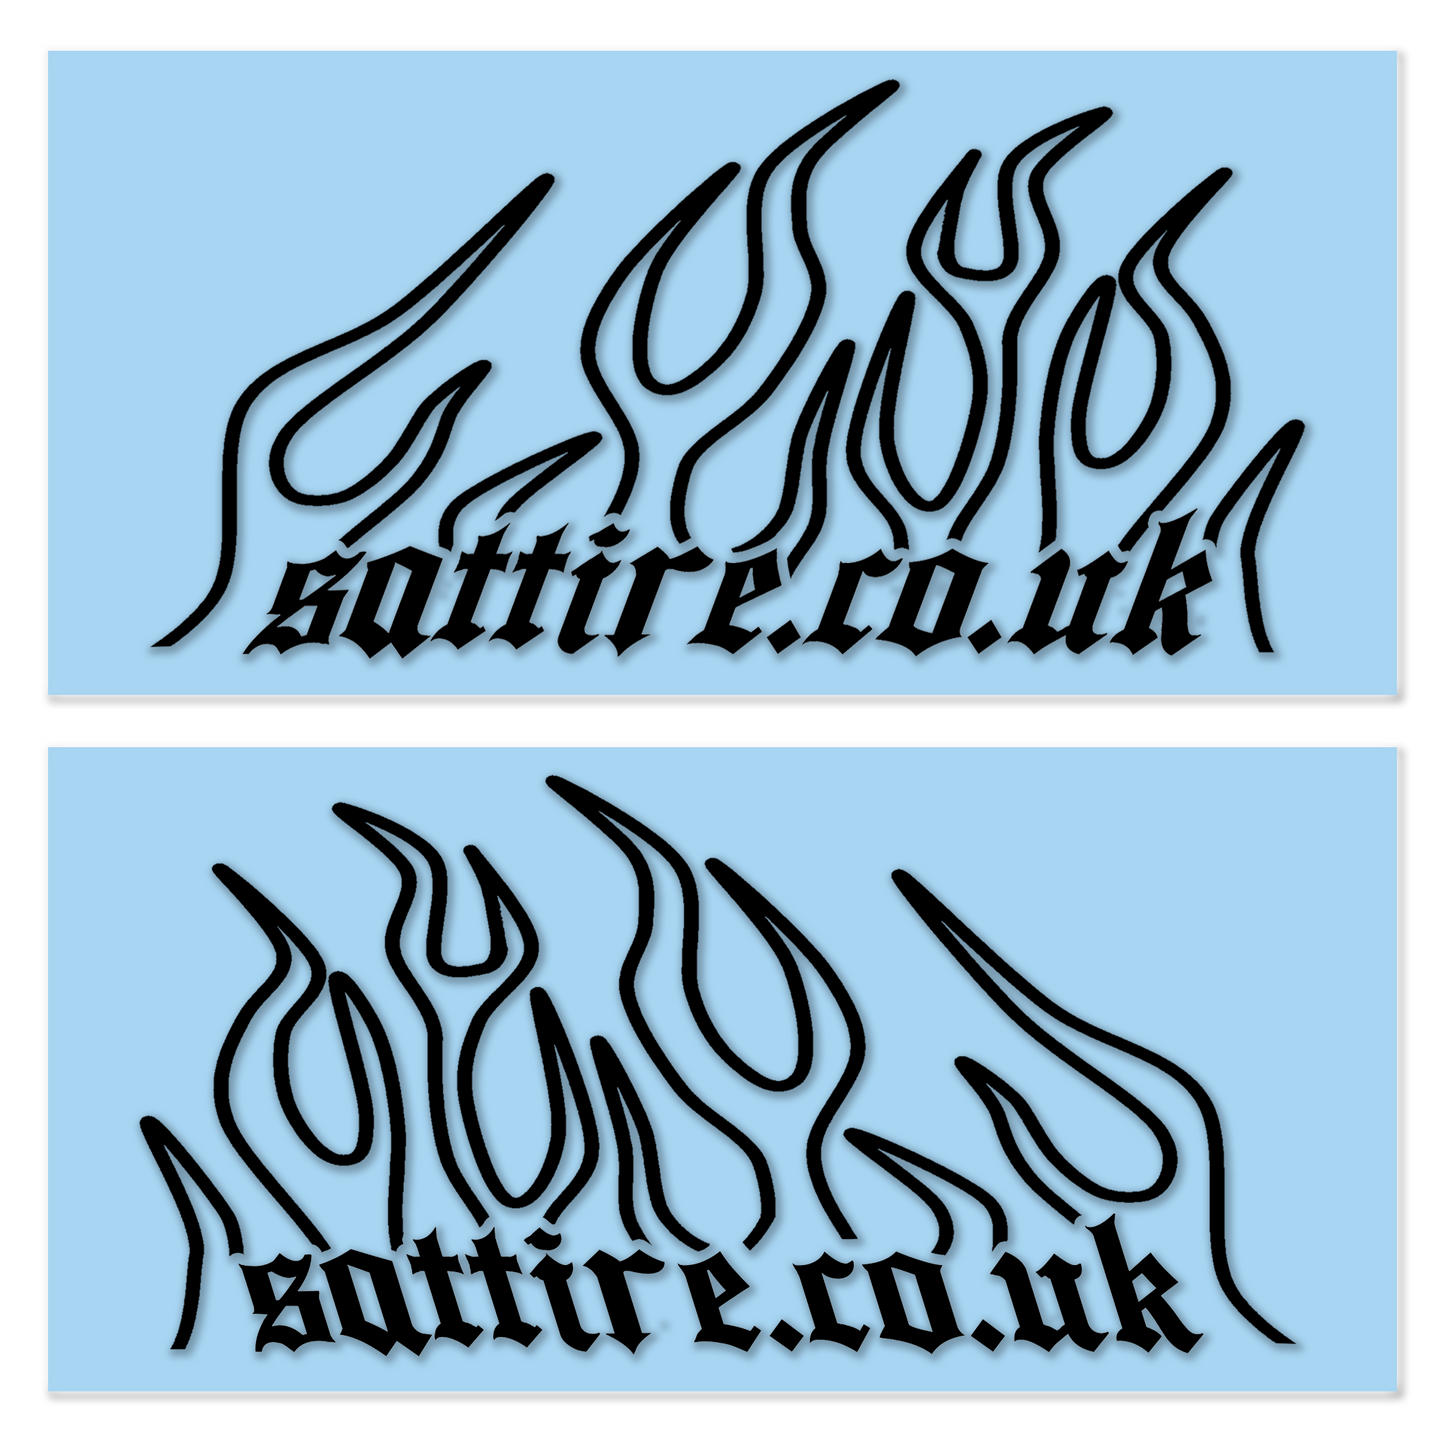 FLAME DECAL STICKERS